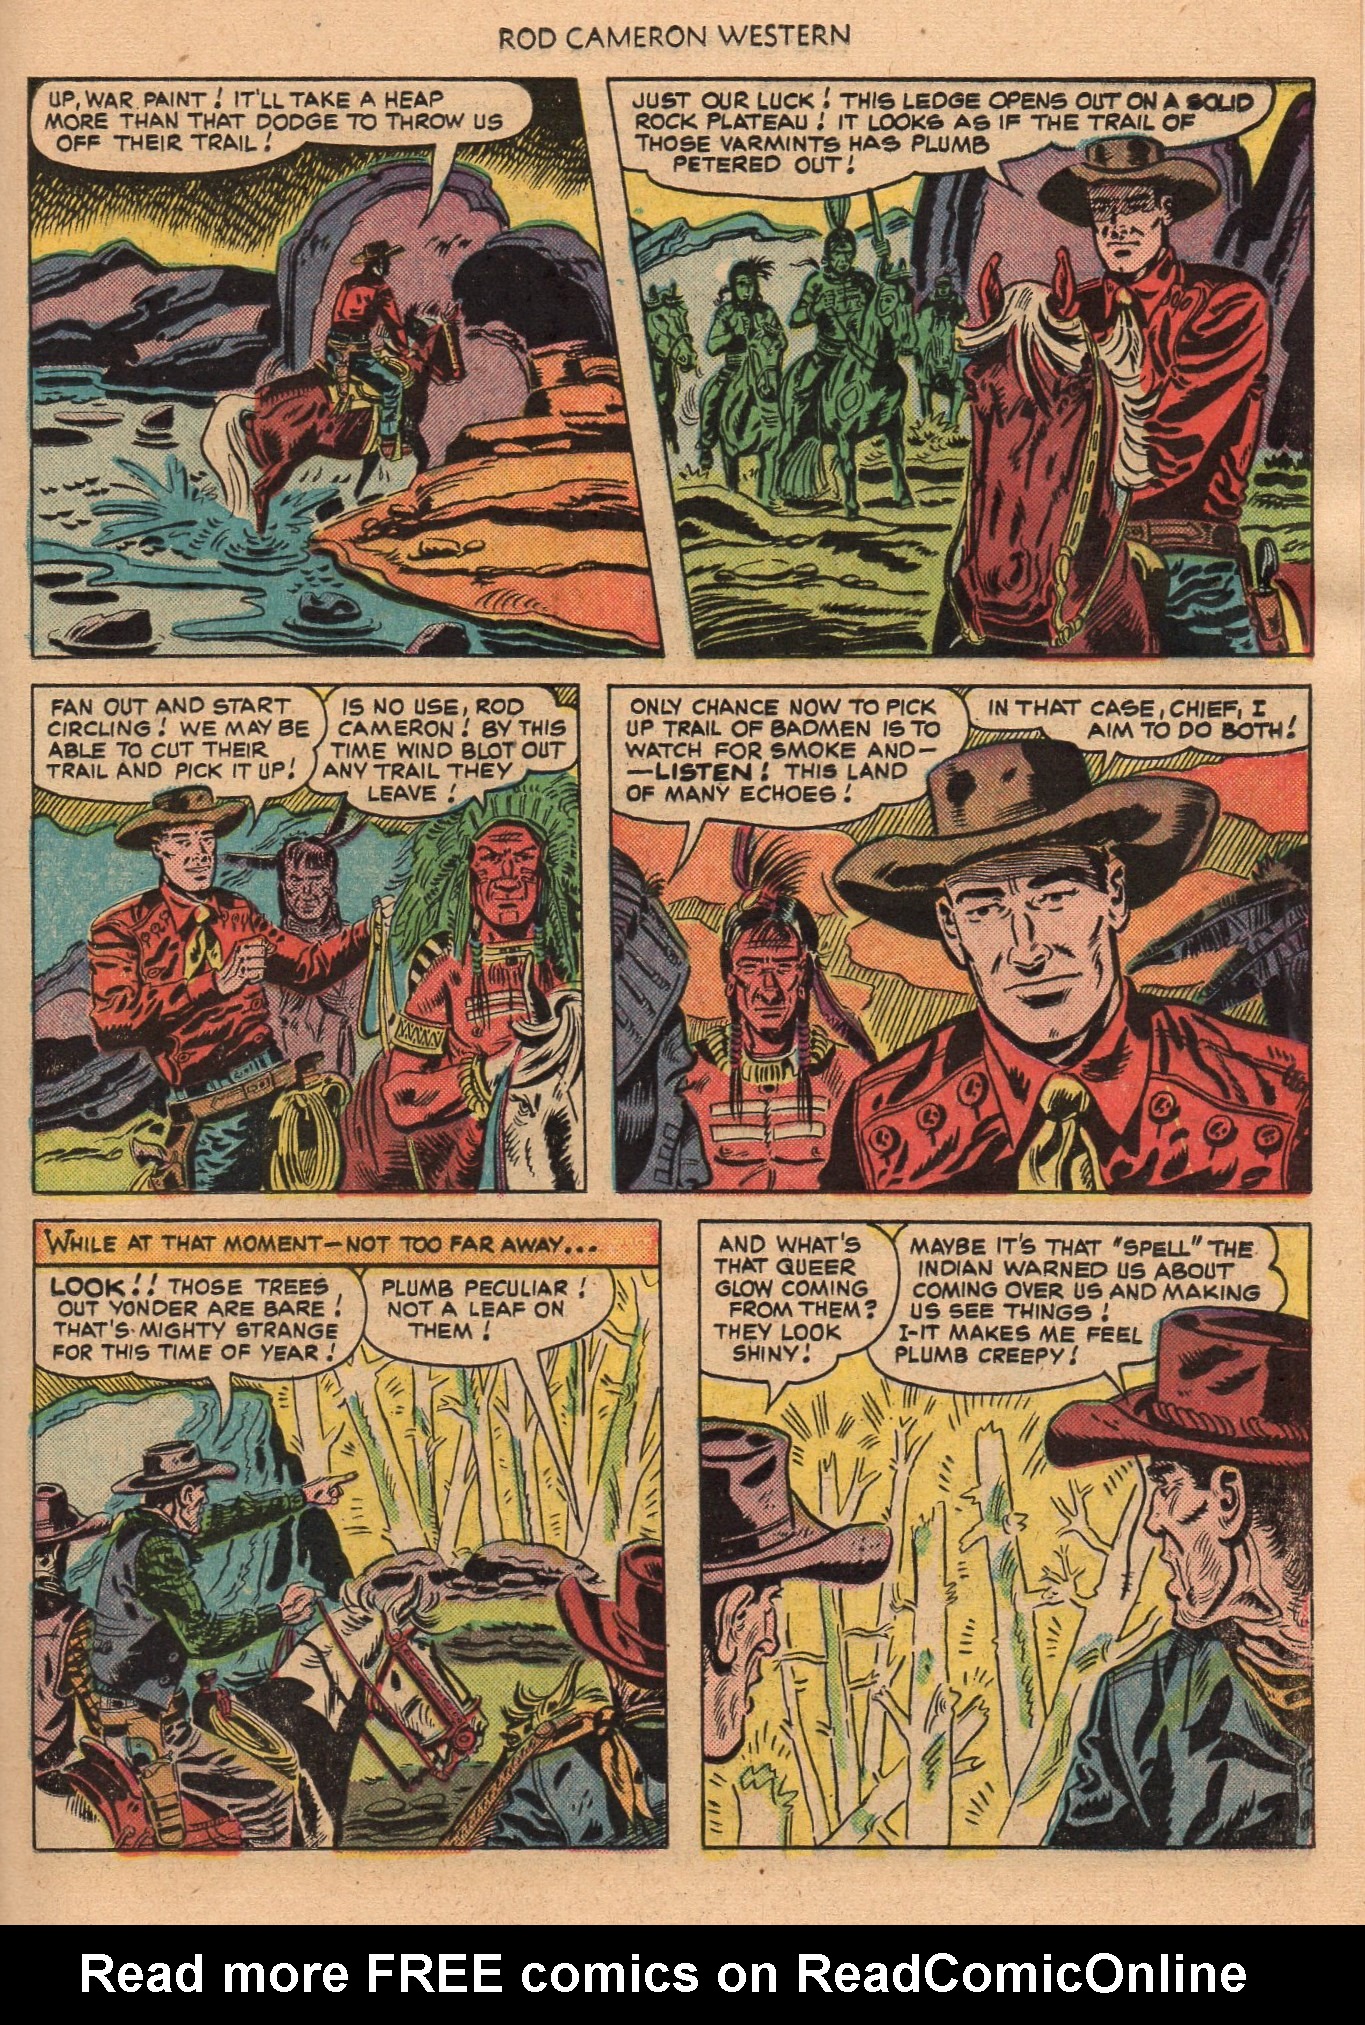 Read online Rod Cameron Western comic -  Issue #6 - 25